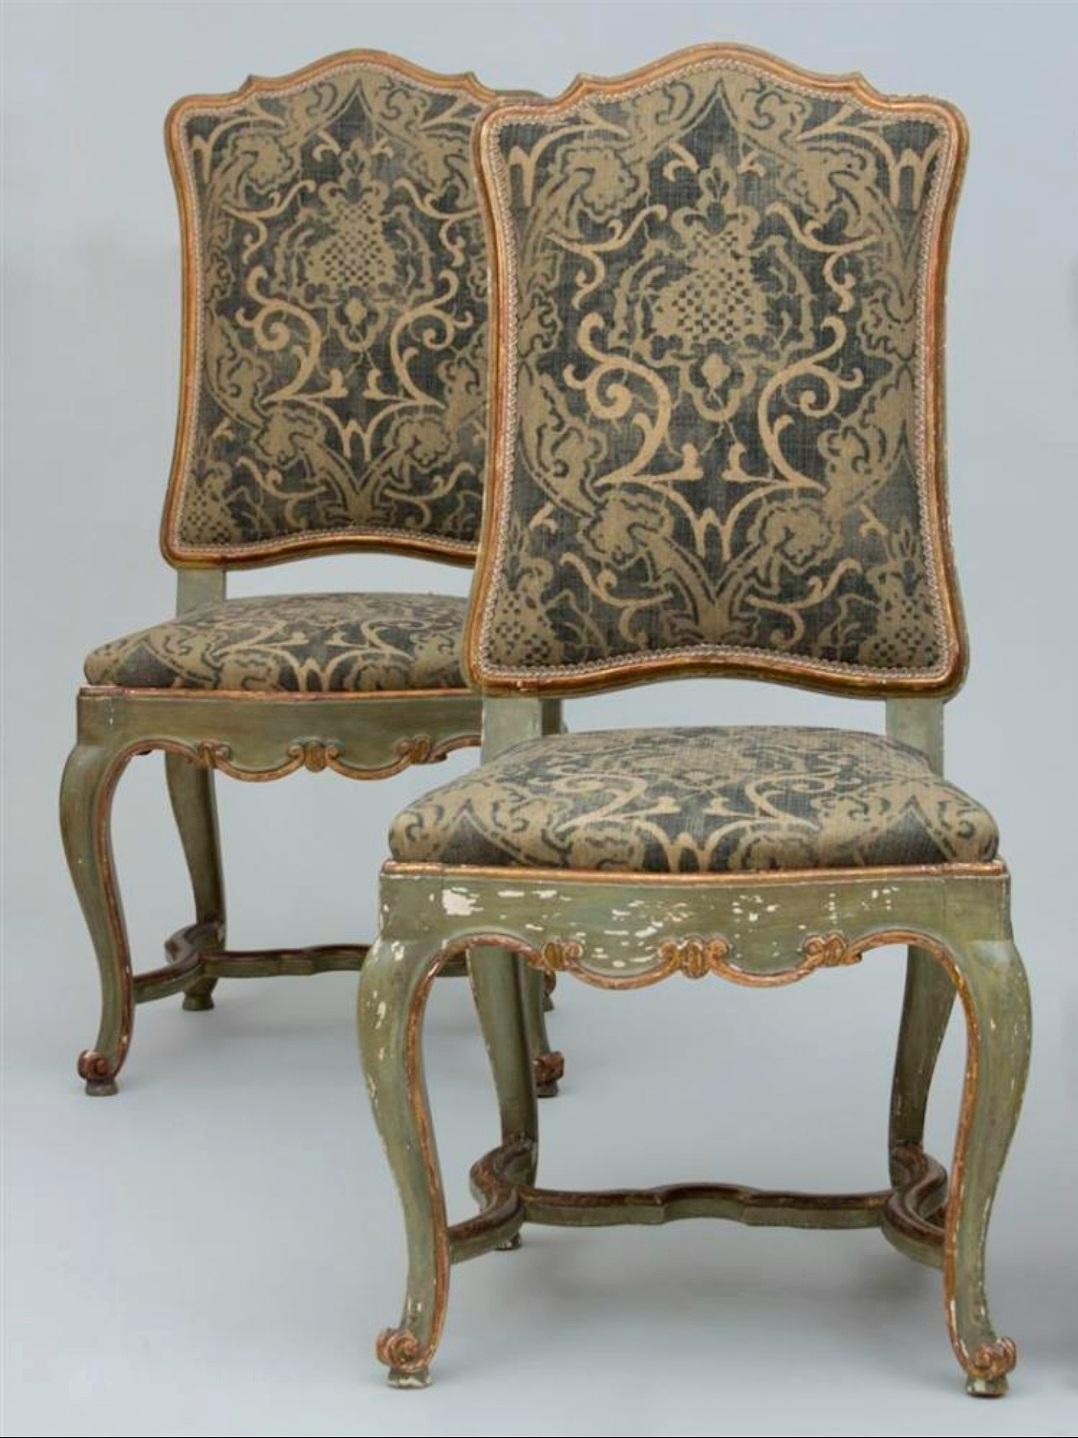 Set of four 18th century Italian painted & parcel-gilt chairs, Venetian. These beautiful chairs have carved wooden frames with sweet detailing. The surface is painted green with gold gilding. Construction is entirety pegged . These chairs are very